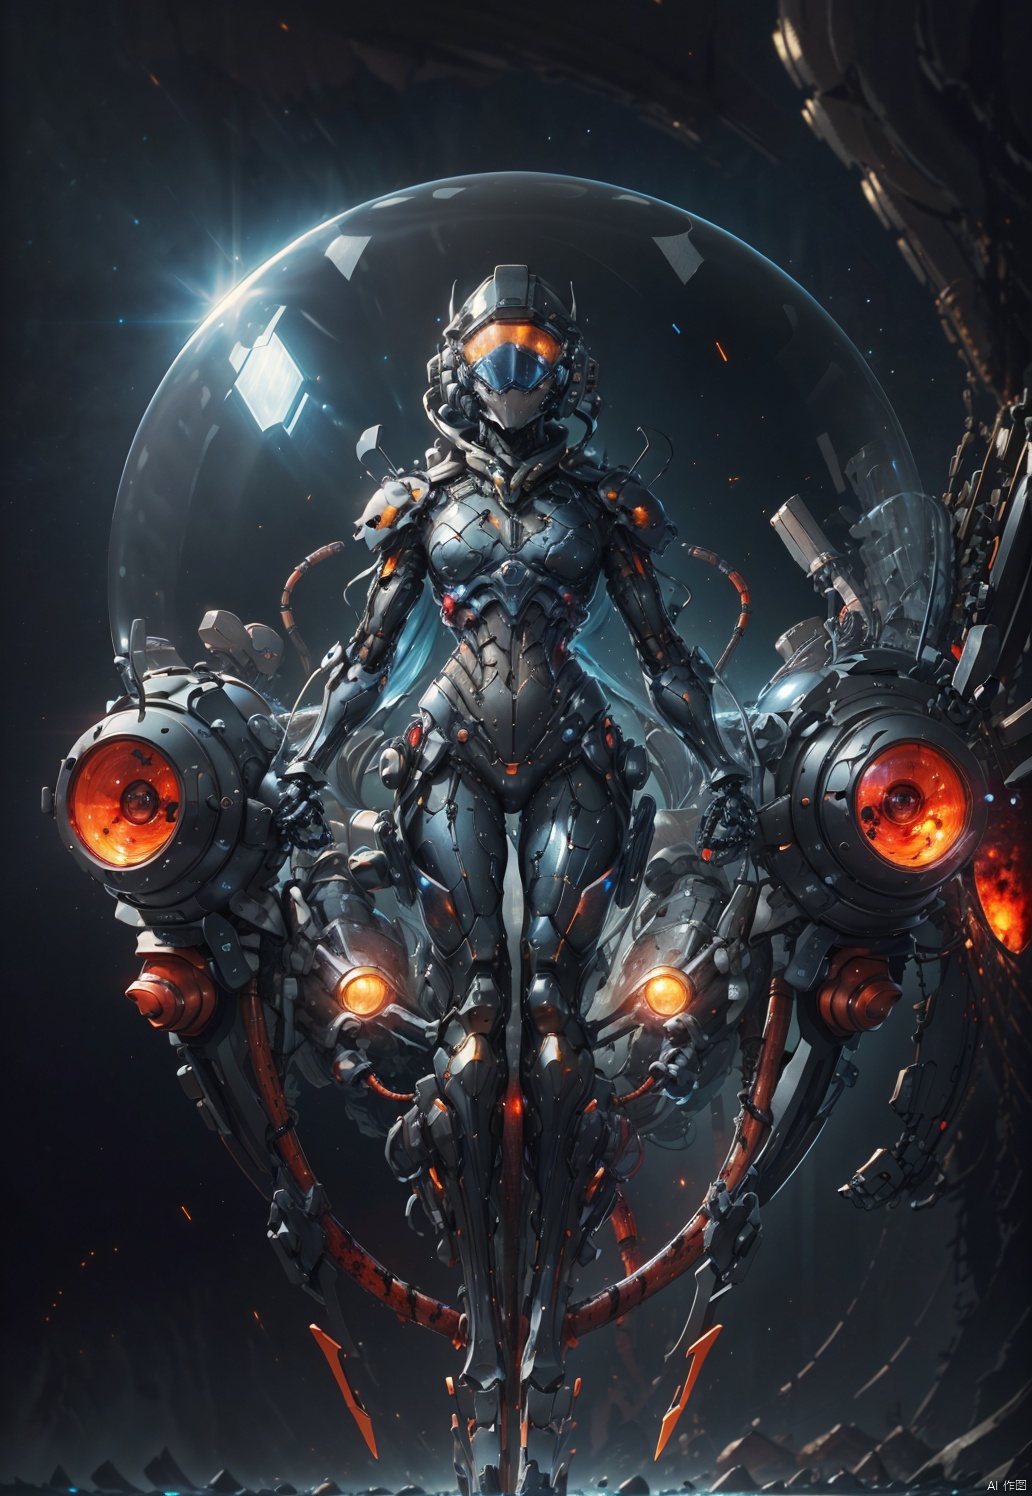 Masterpiece, High Quality, 8K, Cyberpunk Monster Mech (Full Body), Red Eyes, Clear Facial Details, Bright Eyes, Space Background, Detailed Description, Master, Mech Reflection, Advanced Rendering, Transparent Helmet, Flowing Liquid, Liquefied, Sharp, PVC Helmet, Mech Integrated with Body, Clear Body Skeletons, Visceral Blood Flow, Male Body, Exquisite Facial Features, Colorful transparent infusion hose covering the body, (masterpiece), illustrations, best quality, very detailed CG unified 8k wallpaper, very exquisite and beautiful, game_cG, (close-up portrait), background colored graffiti



